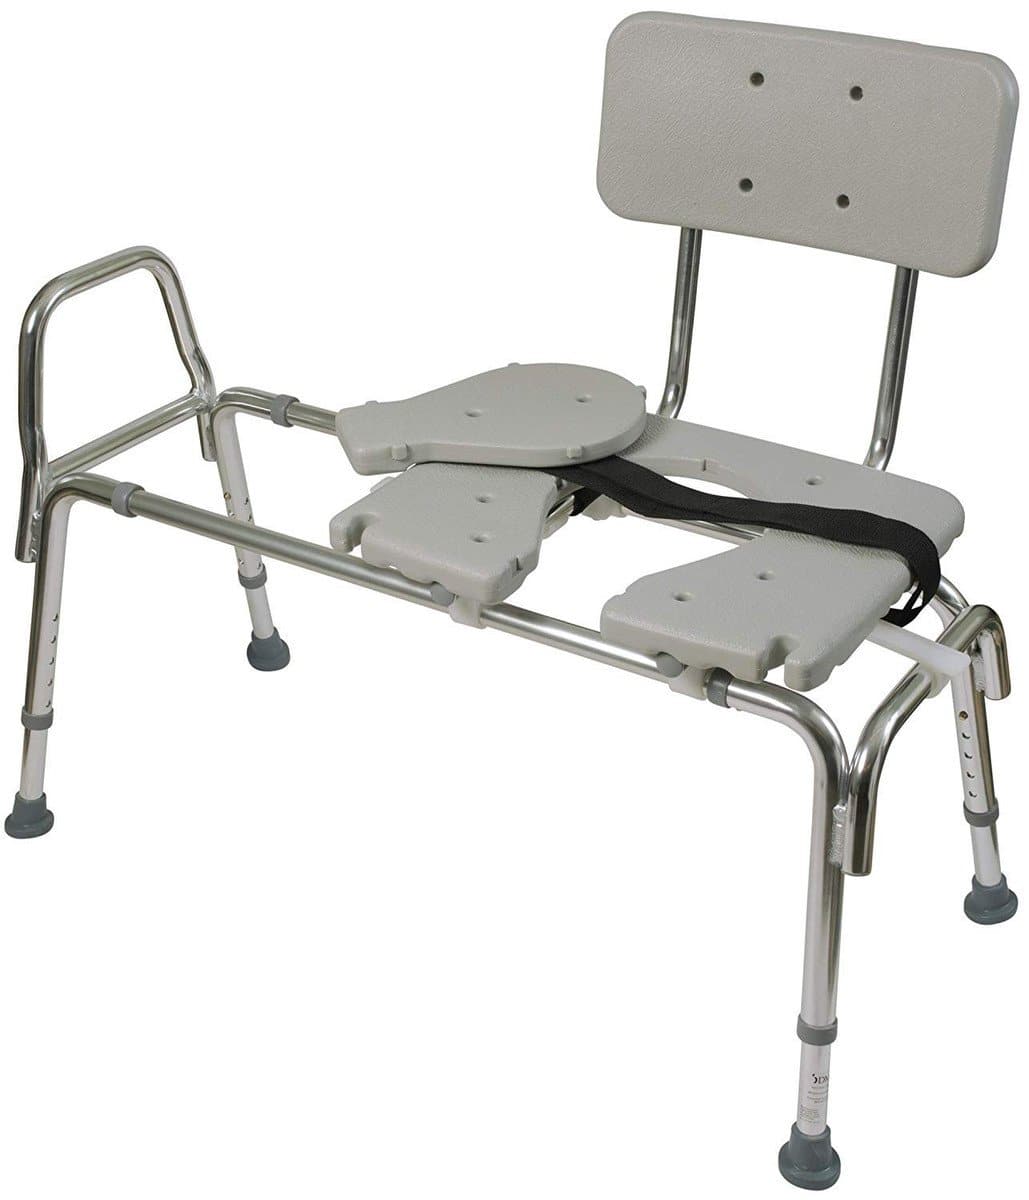 DMI® Sliding Bariatric Transfer Shower Bench with Cut-Out Seat - Senior.com Shower Benches